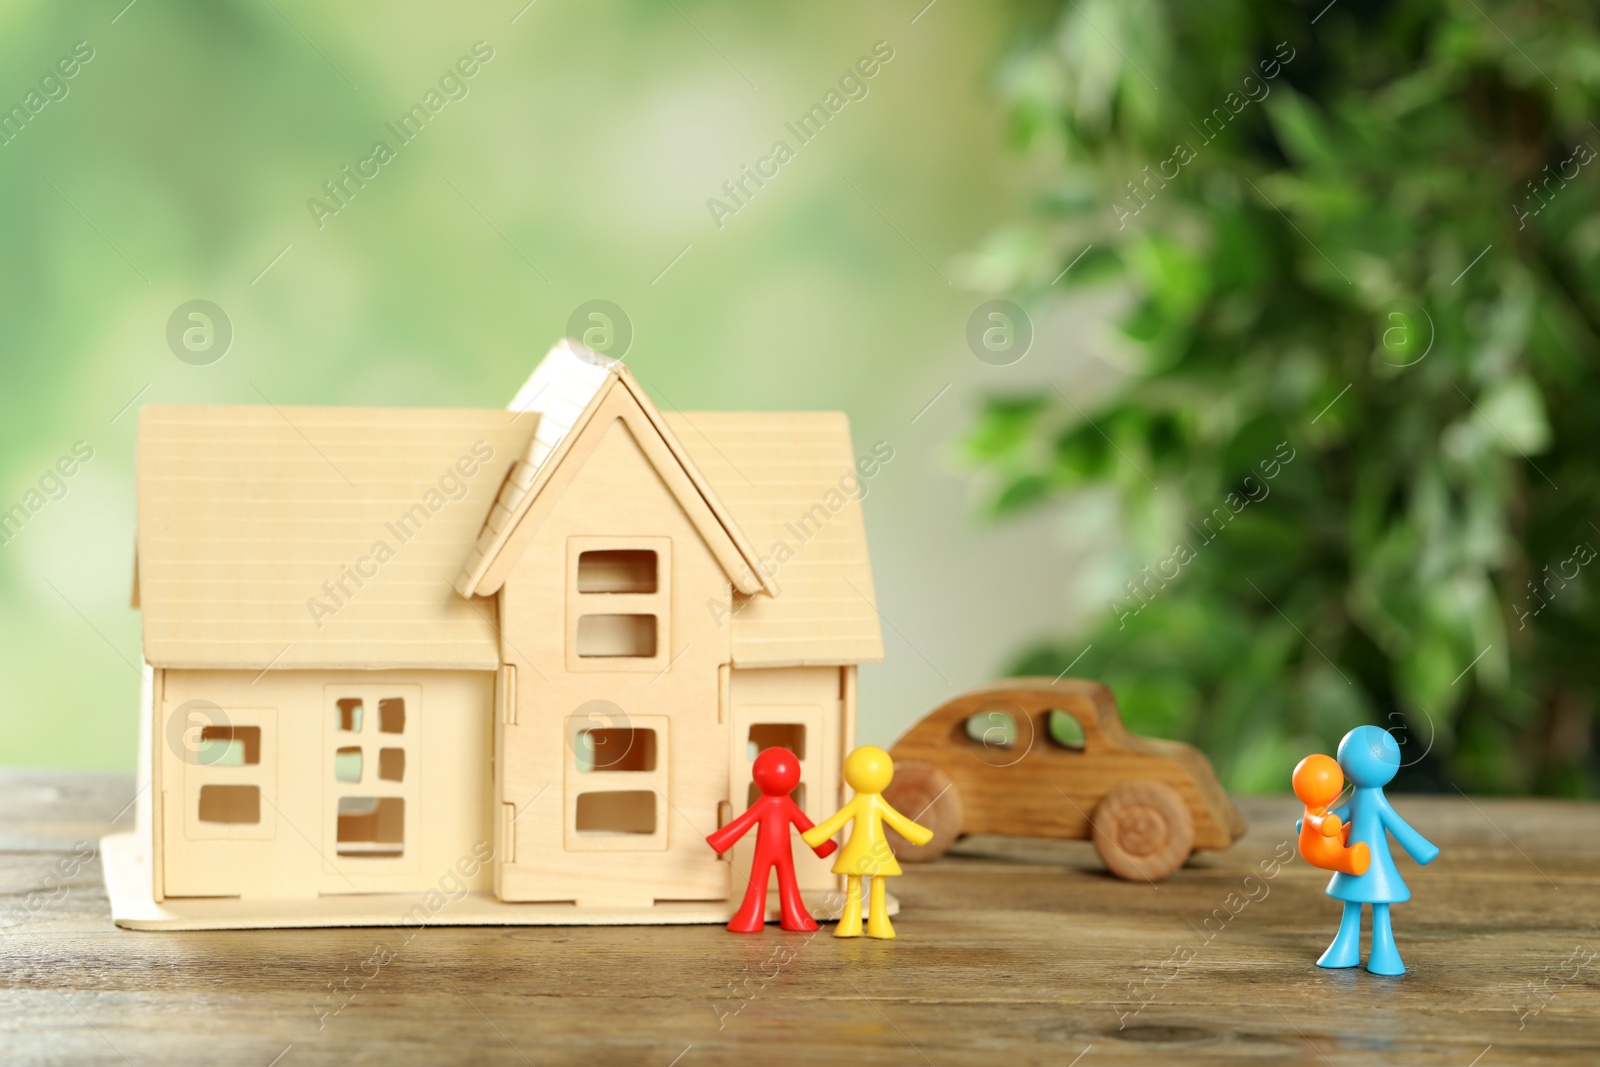 Photo of MYKOLAIV, UKRAINE - JANUARY 04, 2022: Colorful human figures, house model and toy car on wooden table. Surrogacy concept